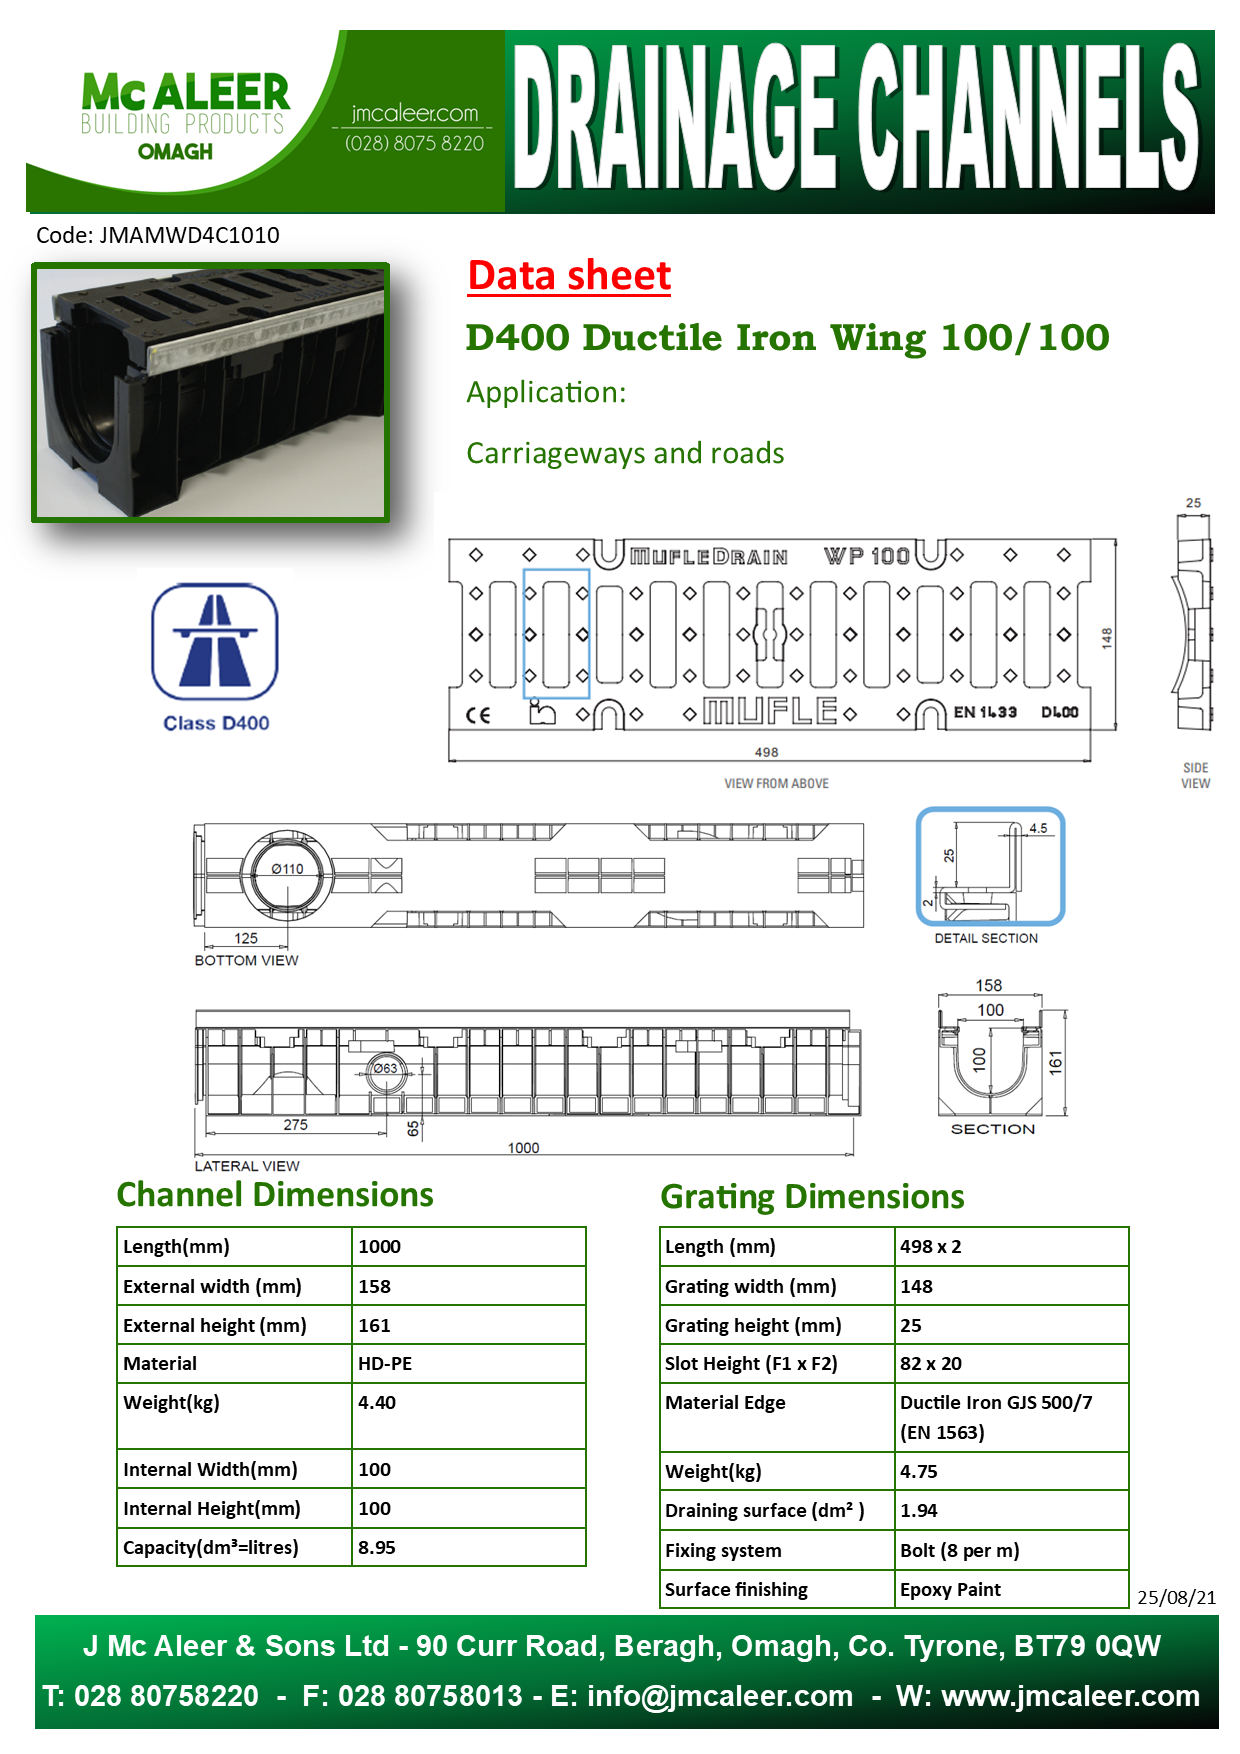 100 100 d400 ductile iron wing